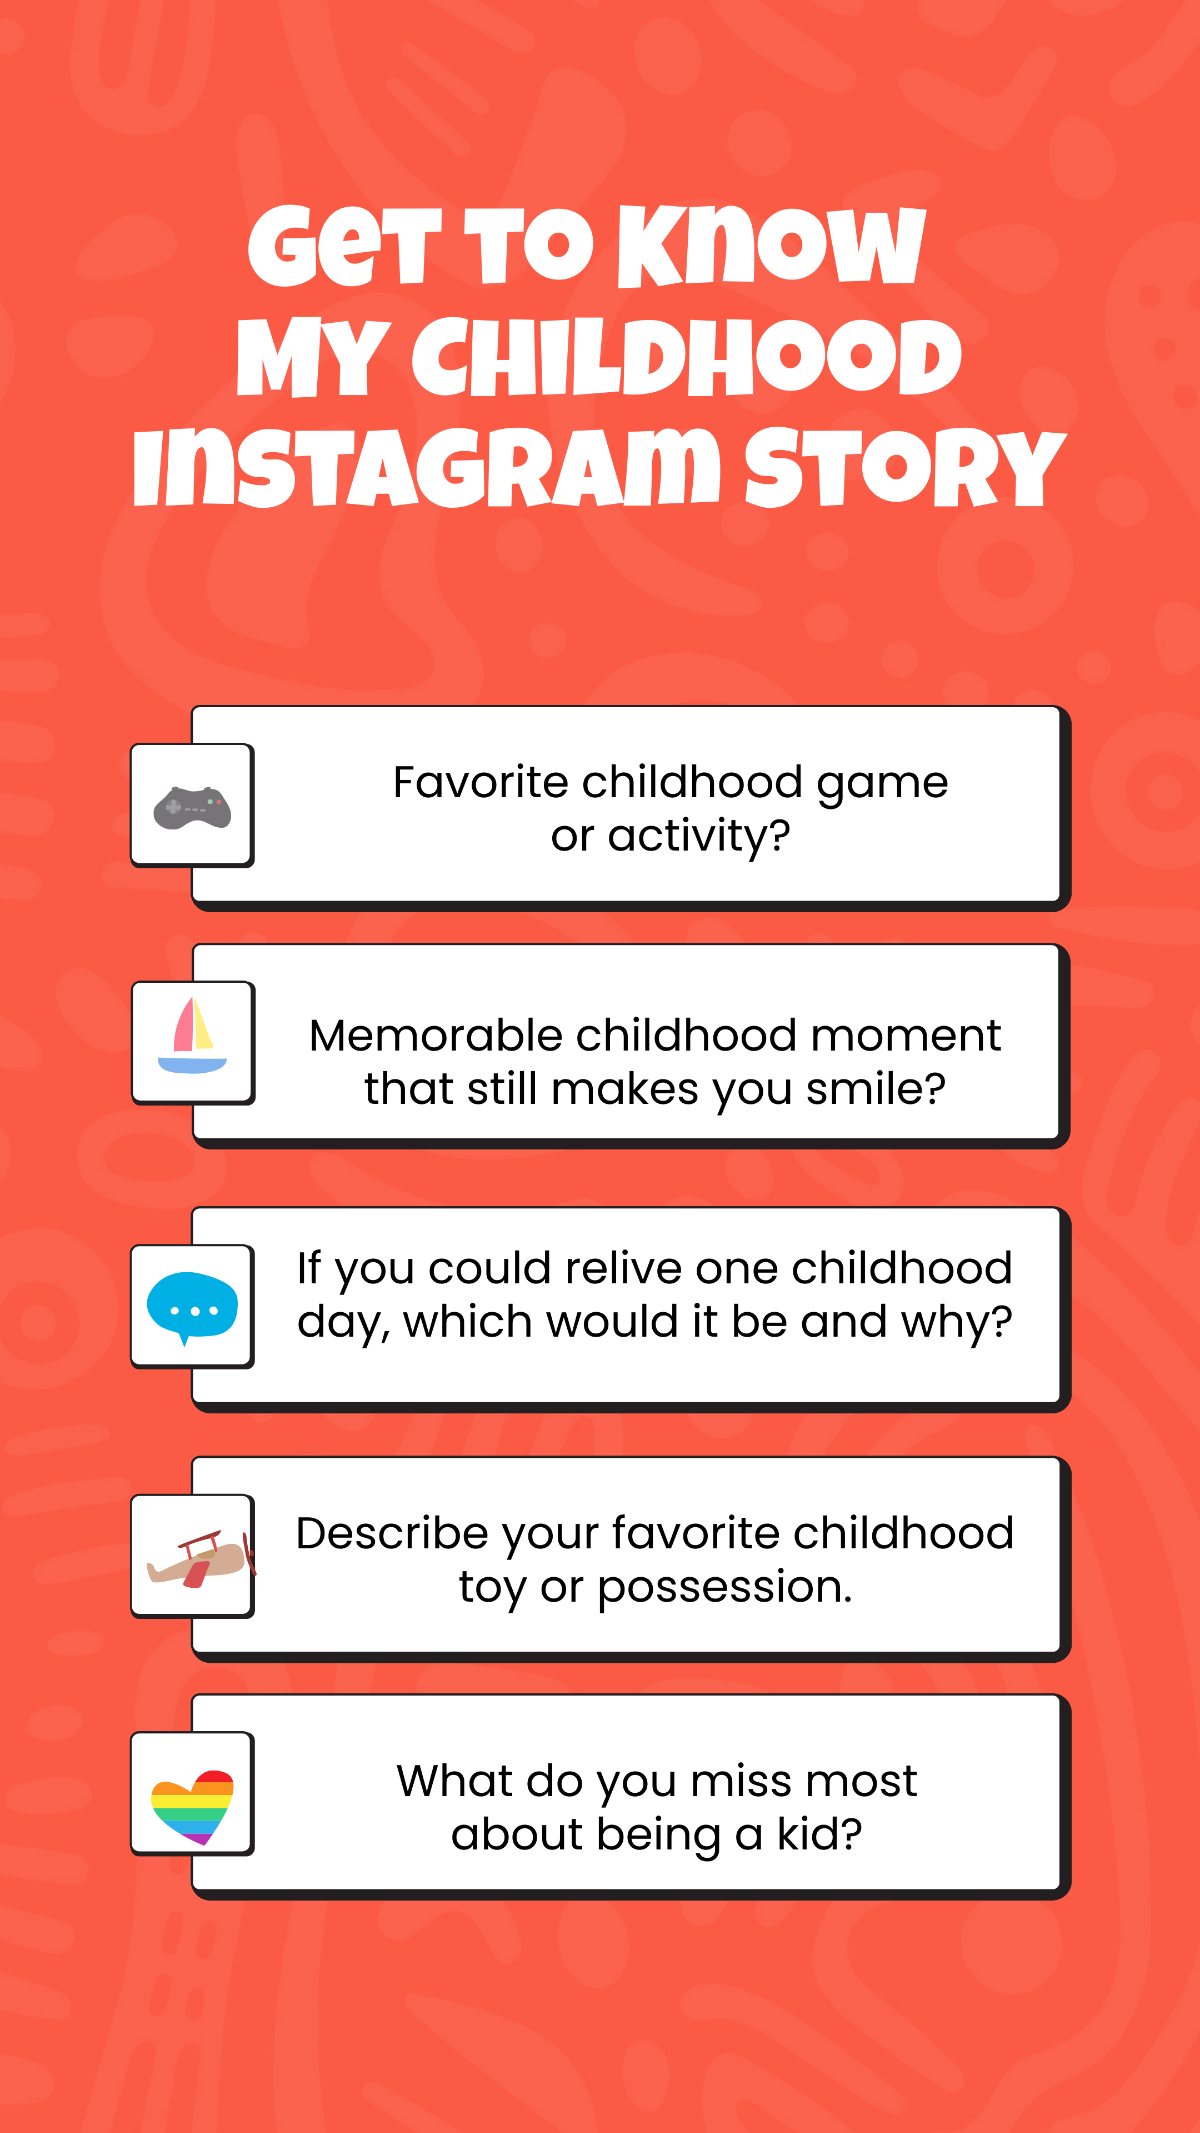 Get to Know My Childhood Instagram Story